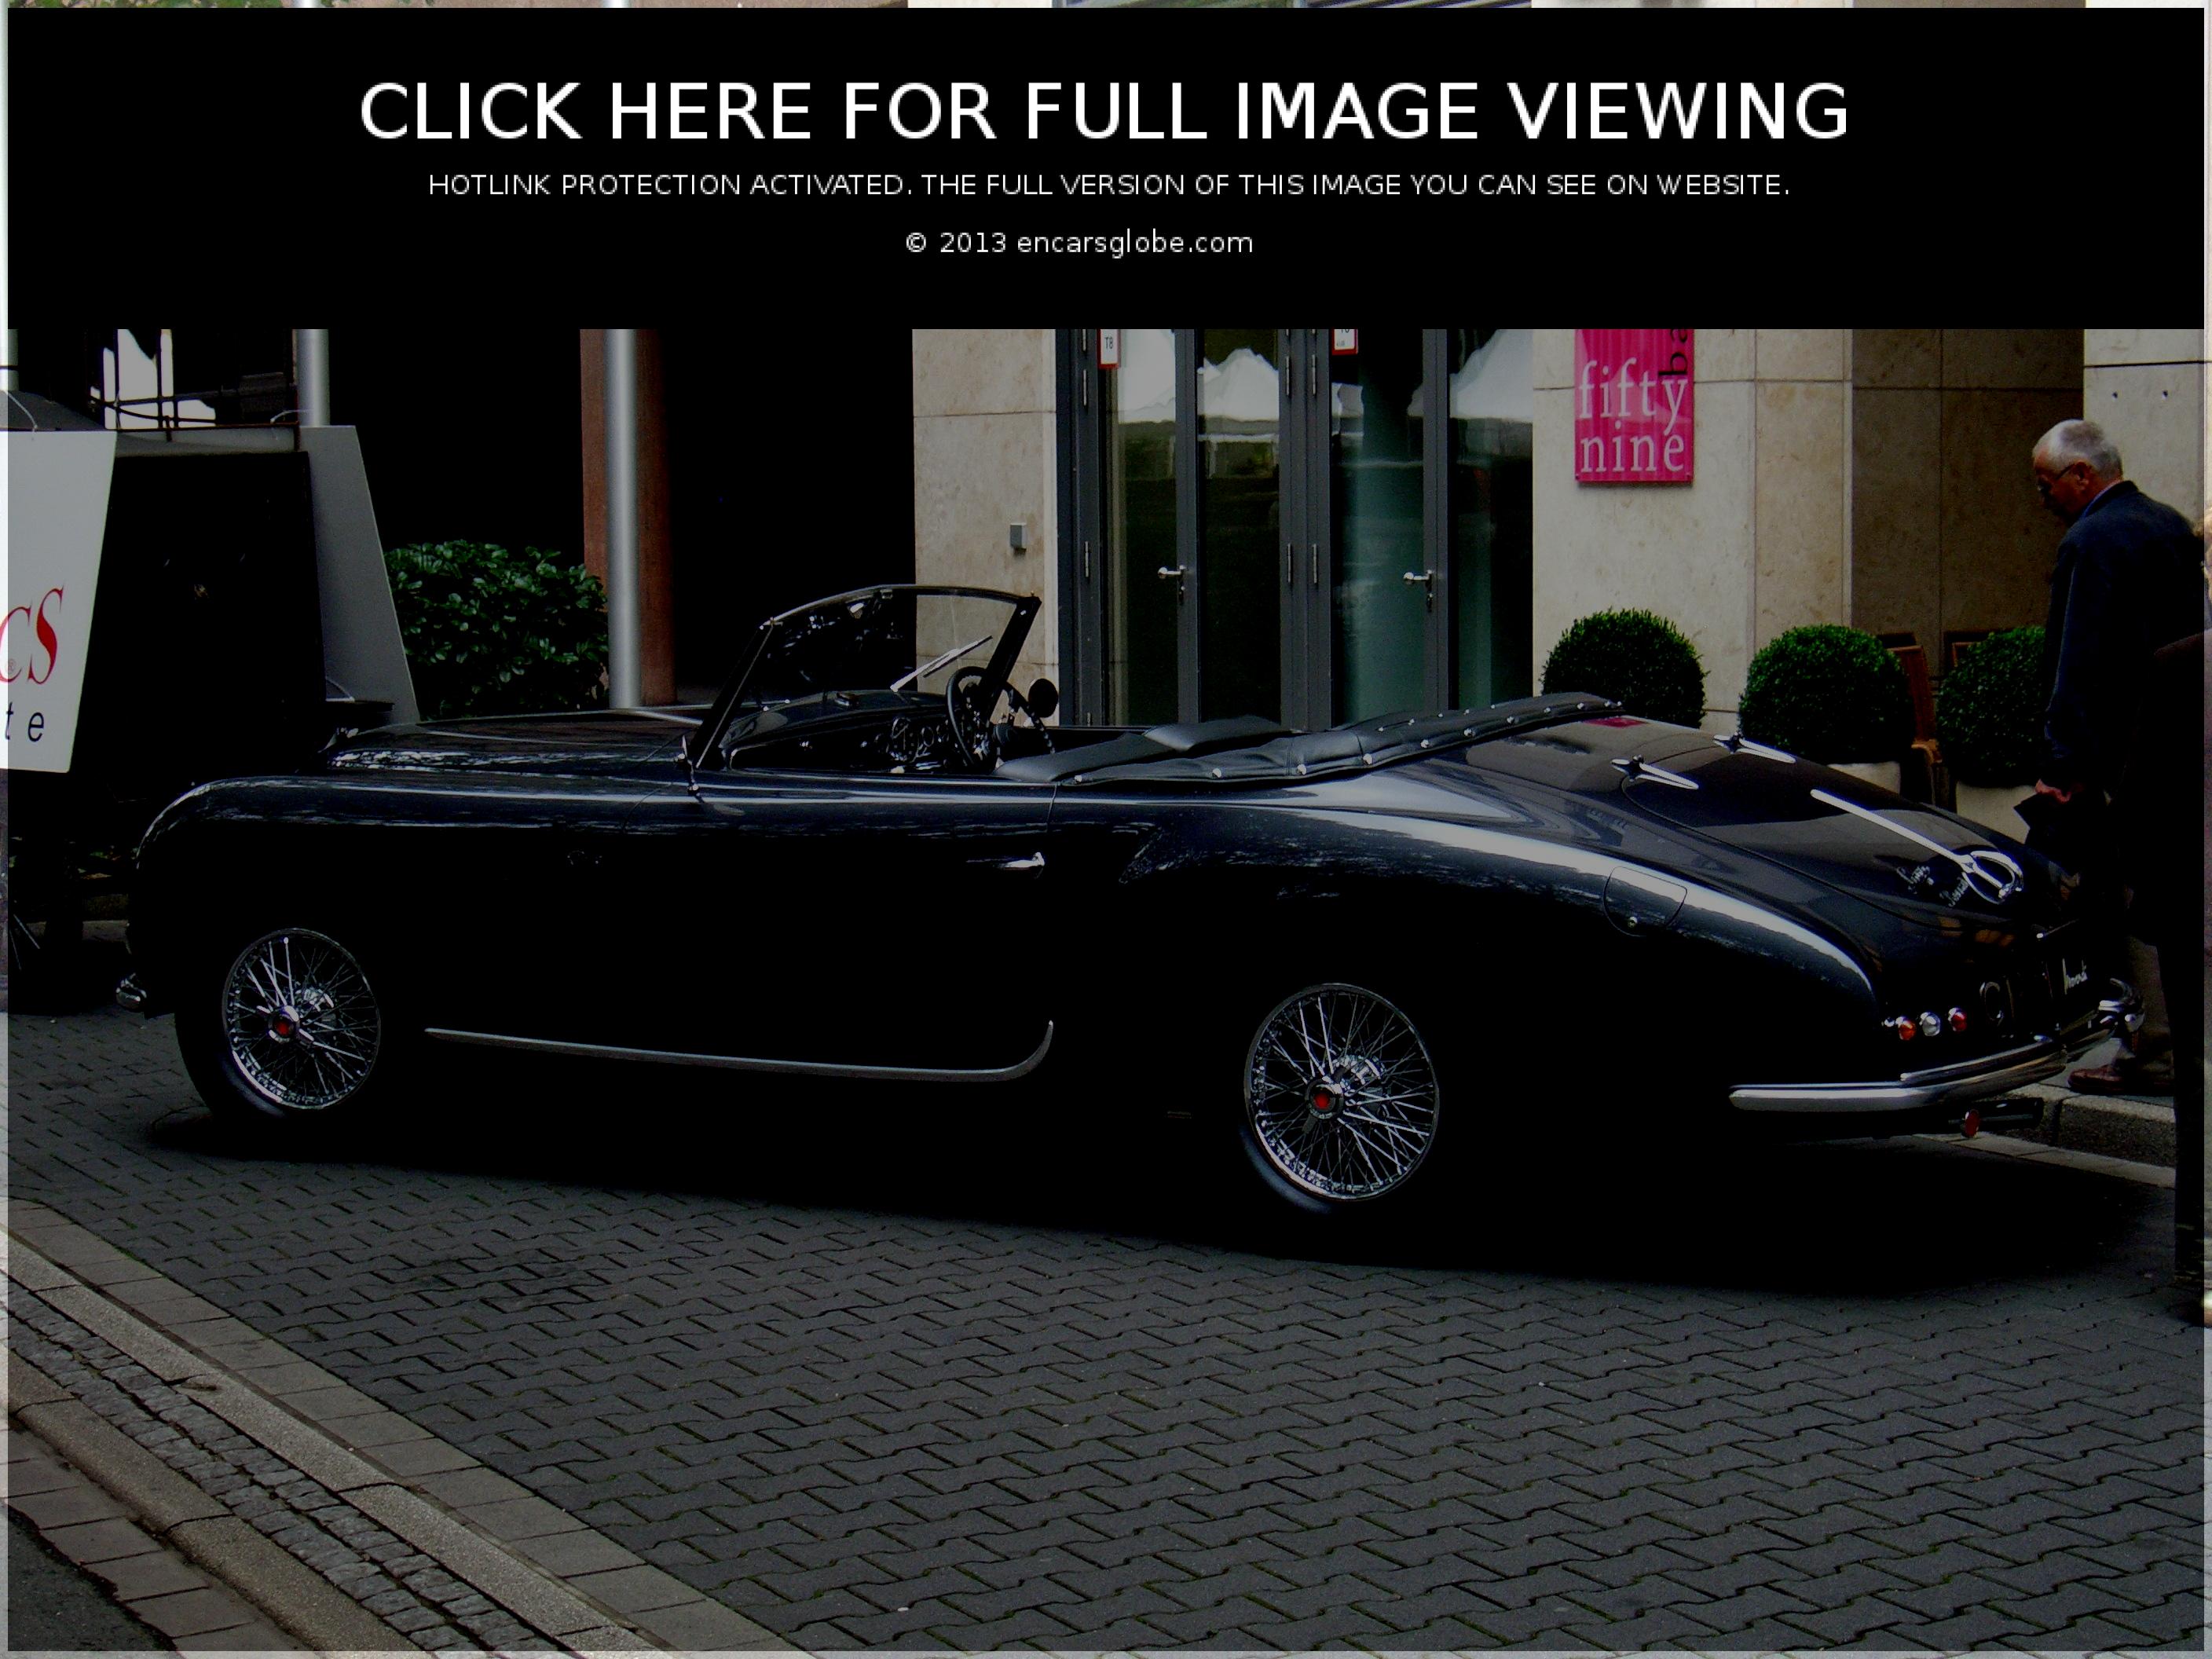 Talbot-Lago Record Cabriolet: Photo gallery, complete information ...